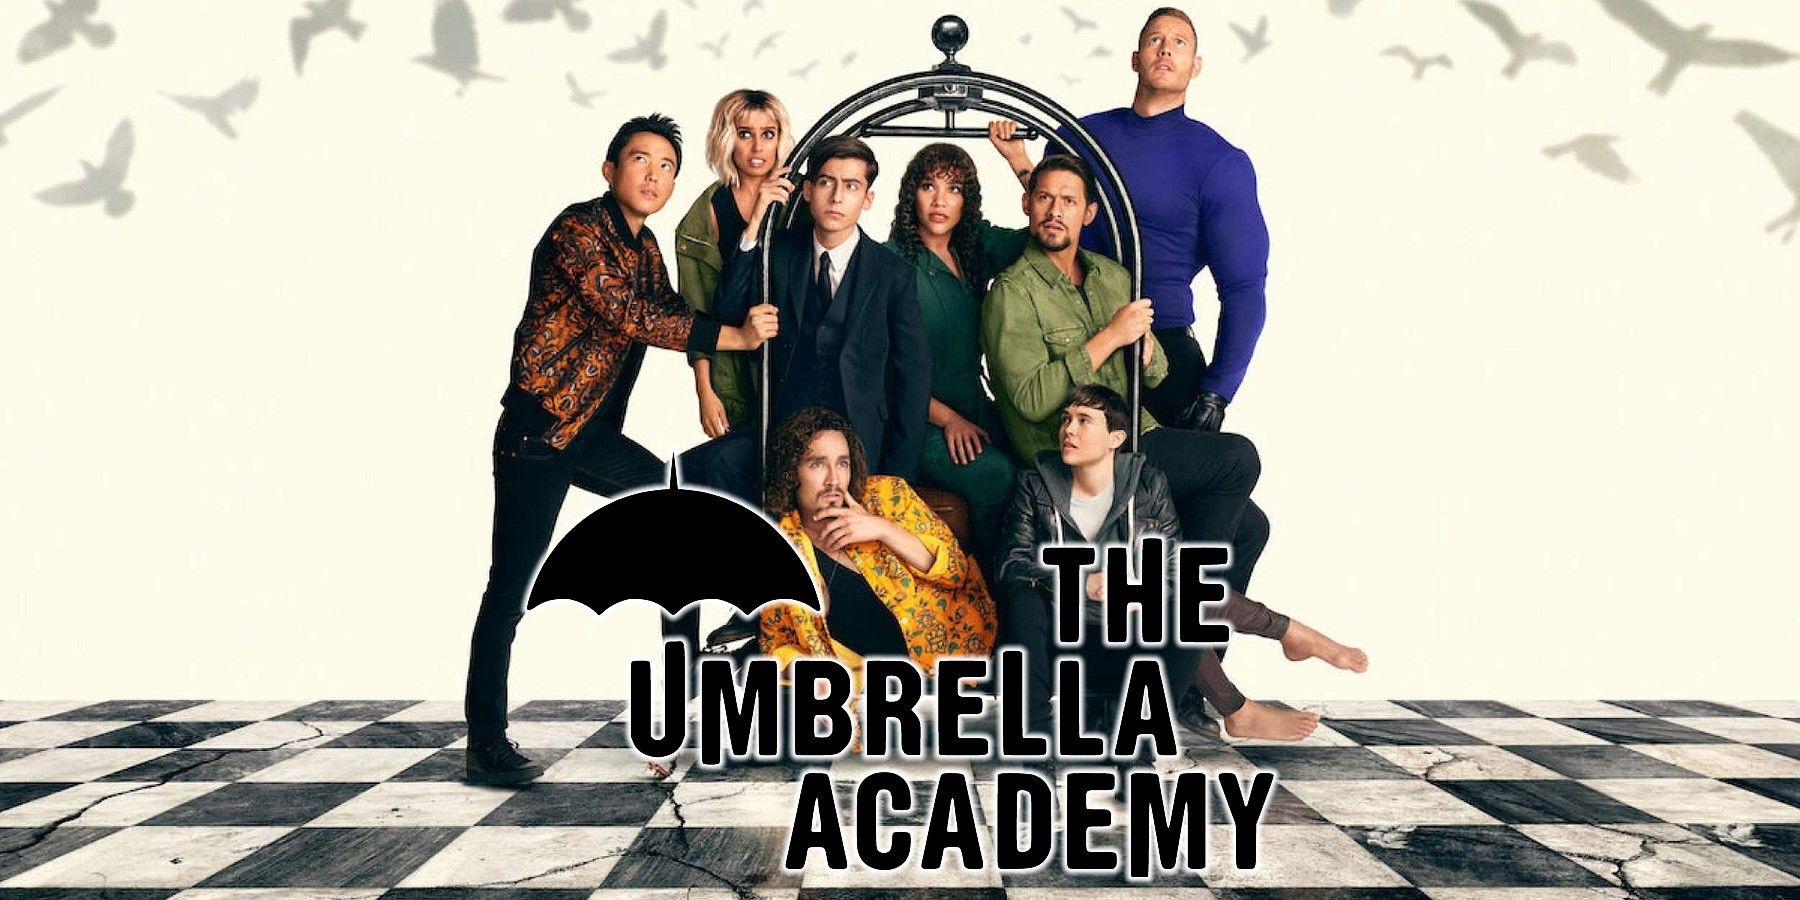 The Umbrella Academy Begins Filming Final Season, New Photo Unveiled